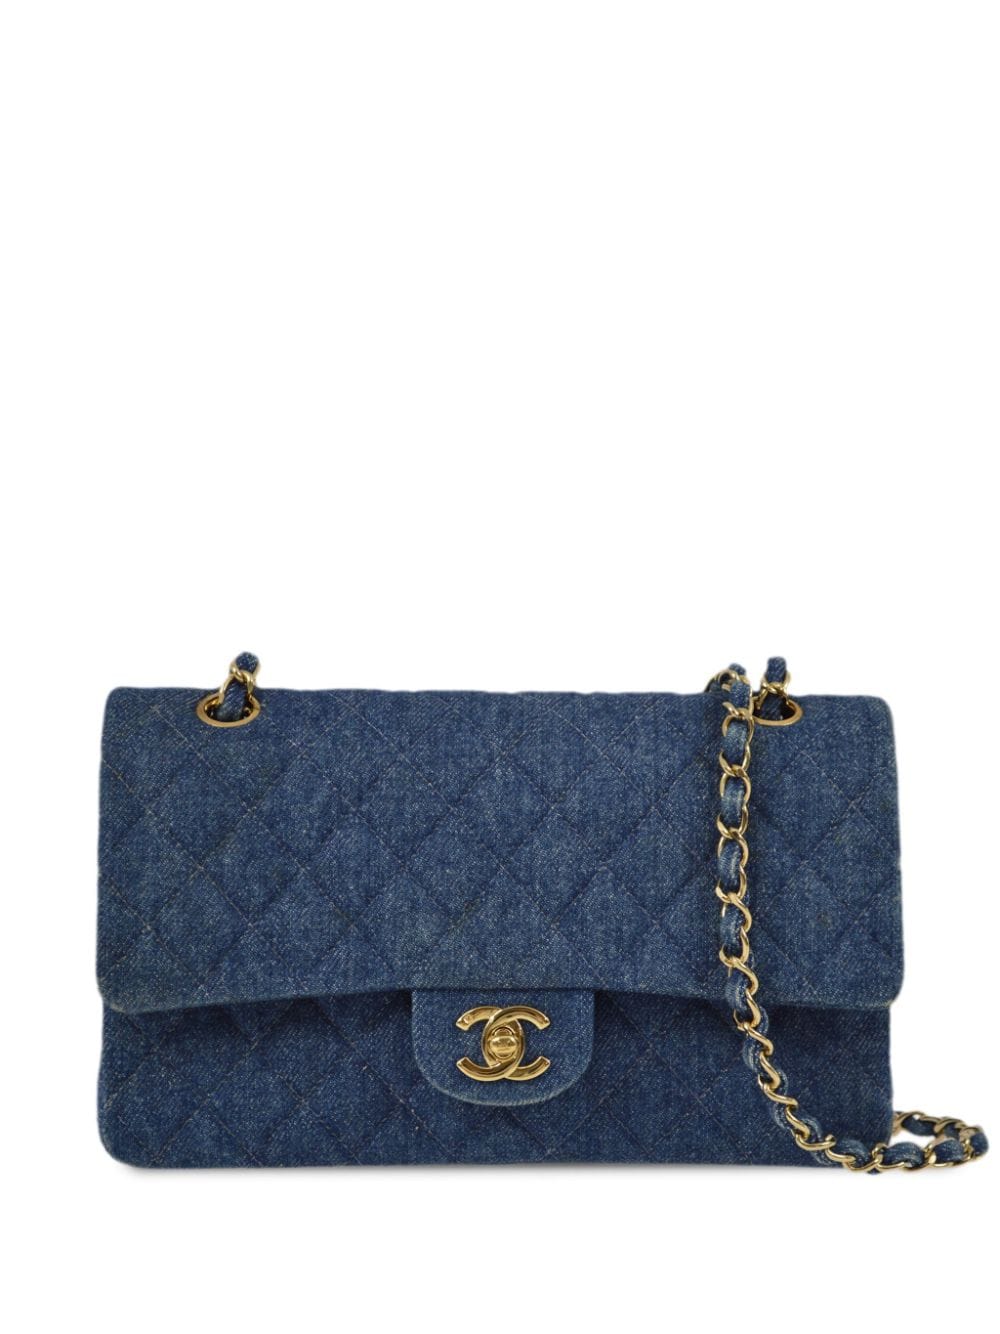 Pre-owned Chanel 1998 Medium Double Flap Shoulder Bag In Blue